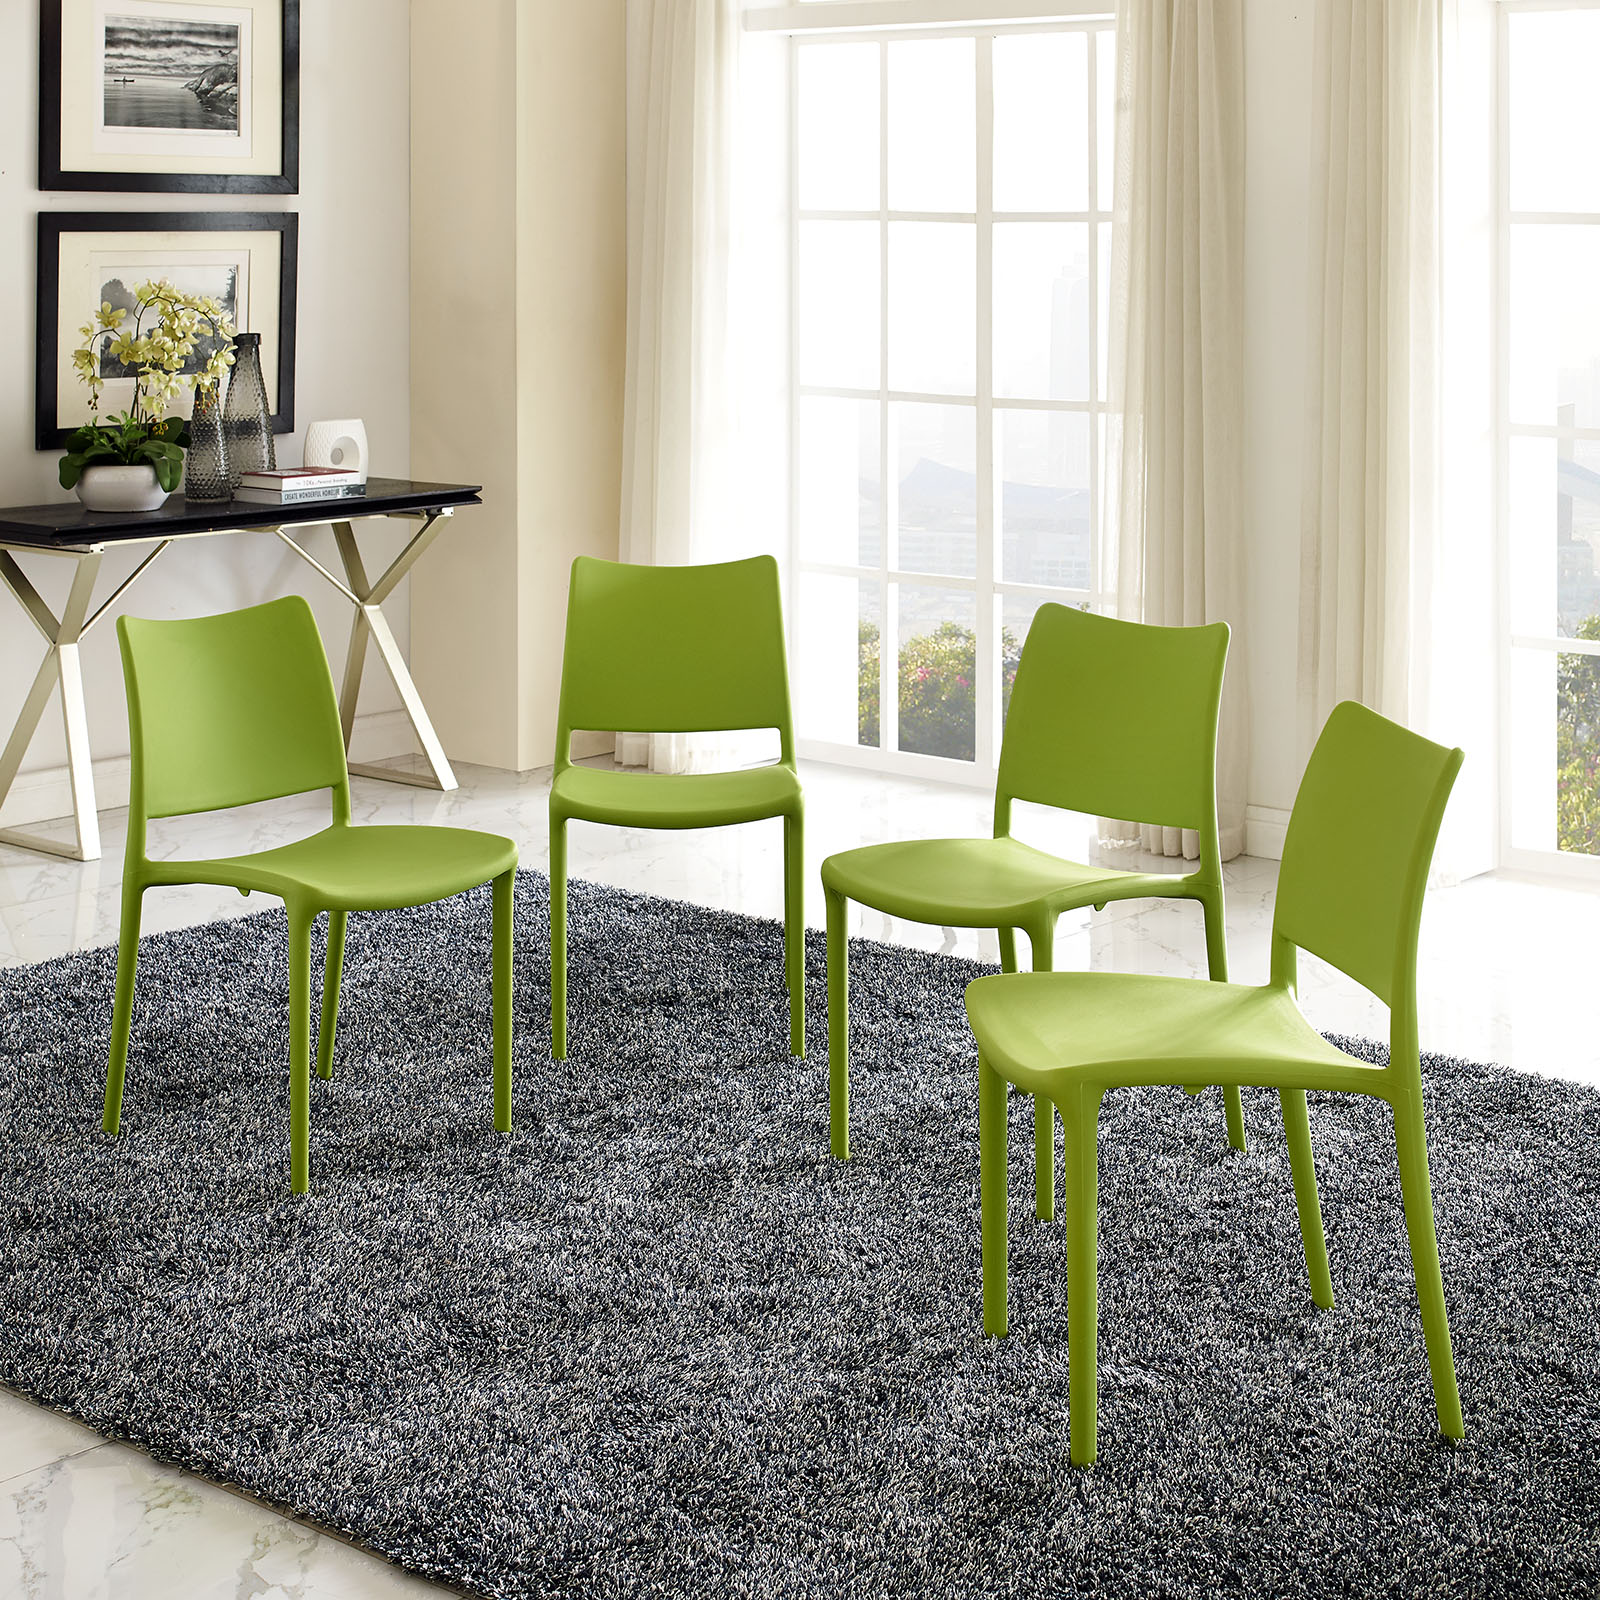 Modern Contemporary Urban Design Outdoor Kitchen Room Dining Chair ( Set of 4), Green, Plastic - image 2 of 5